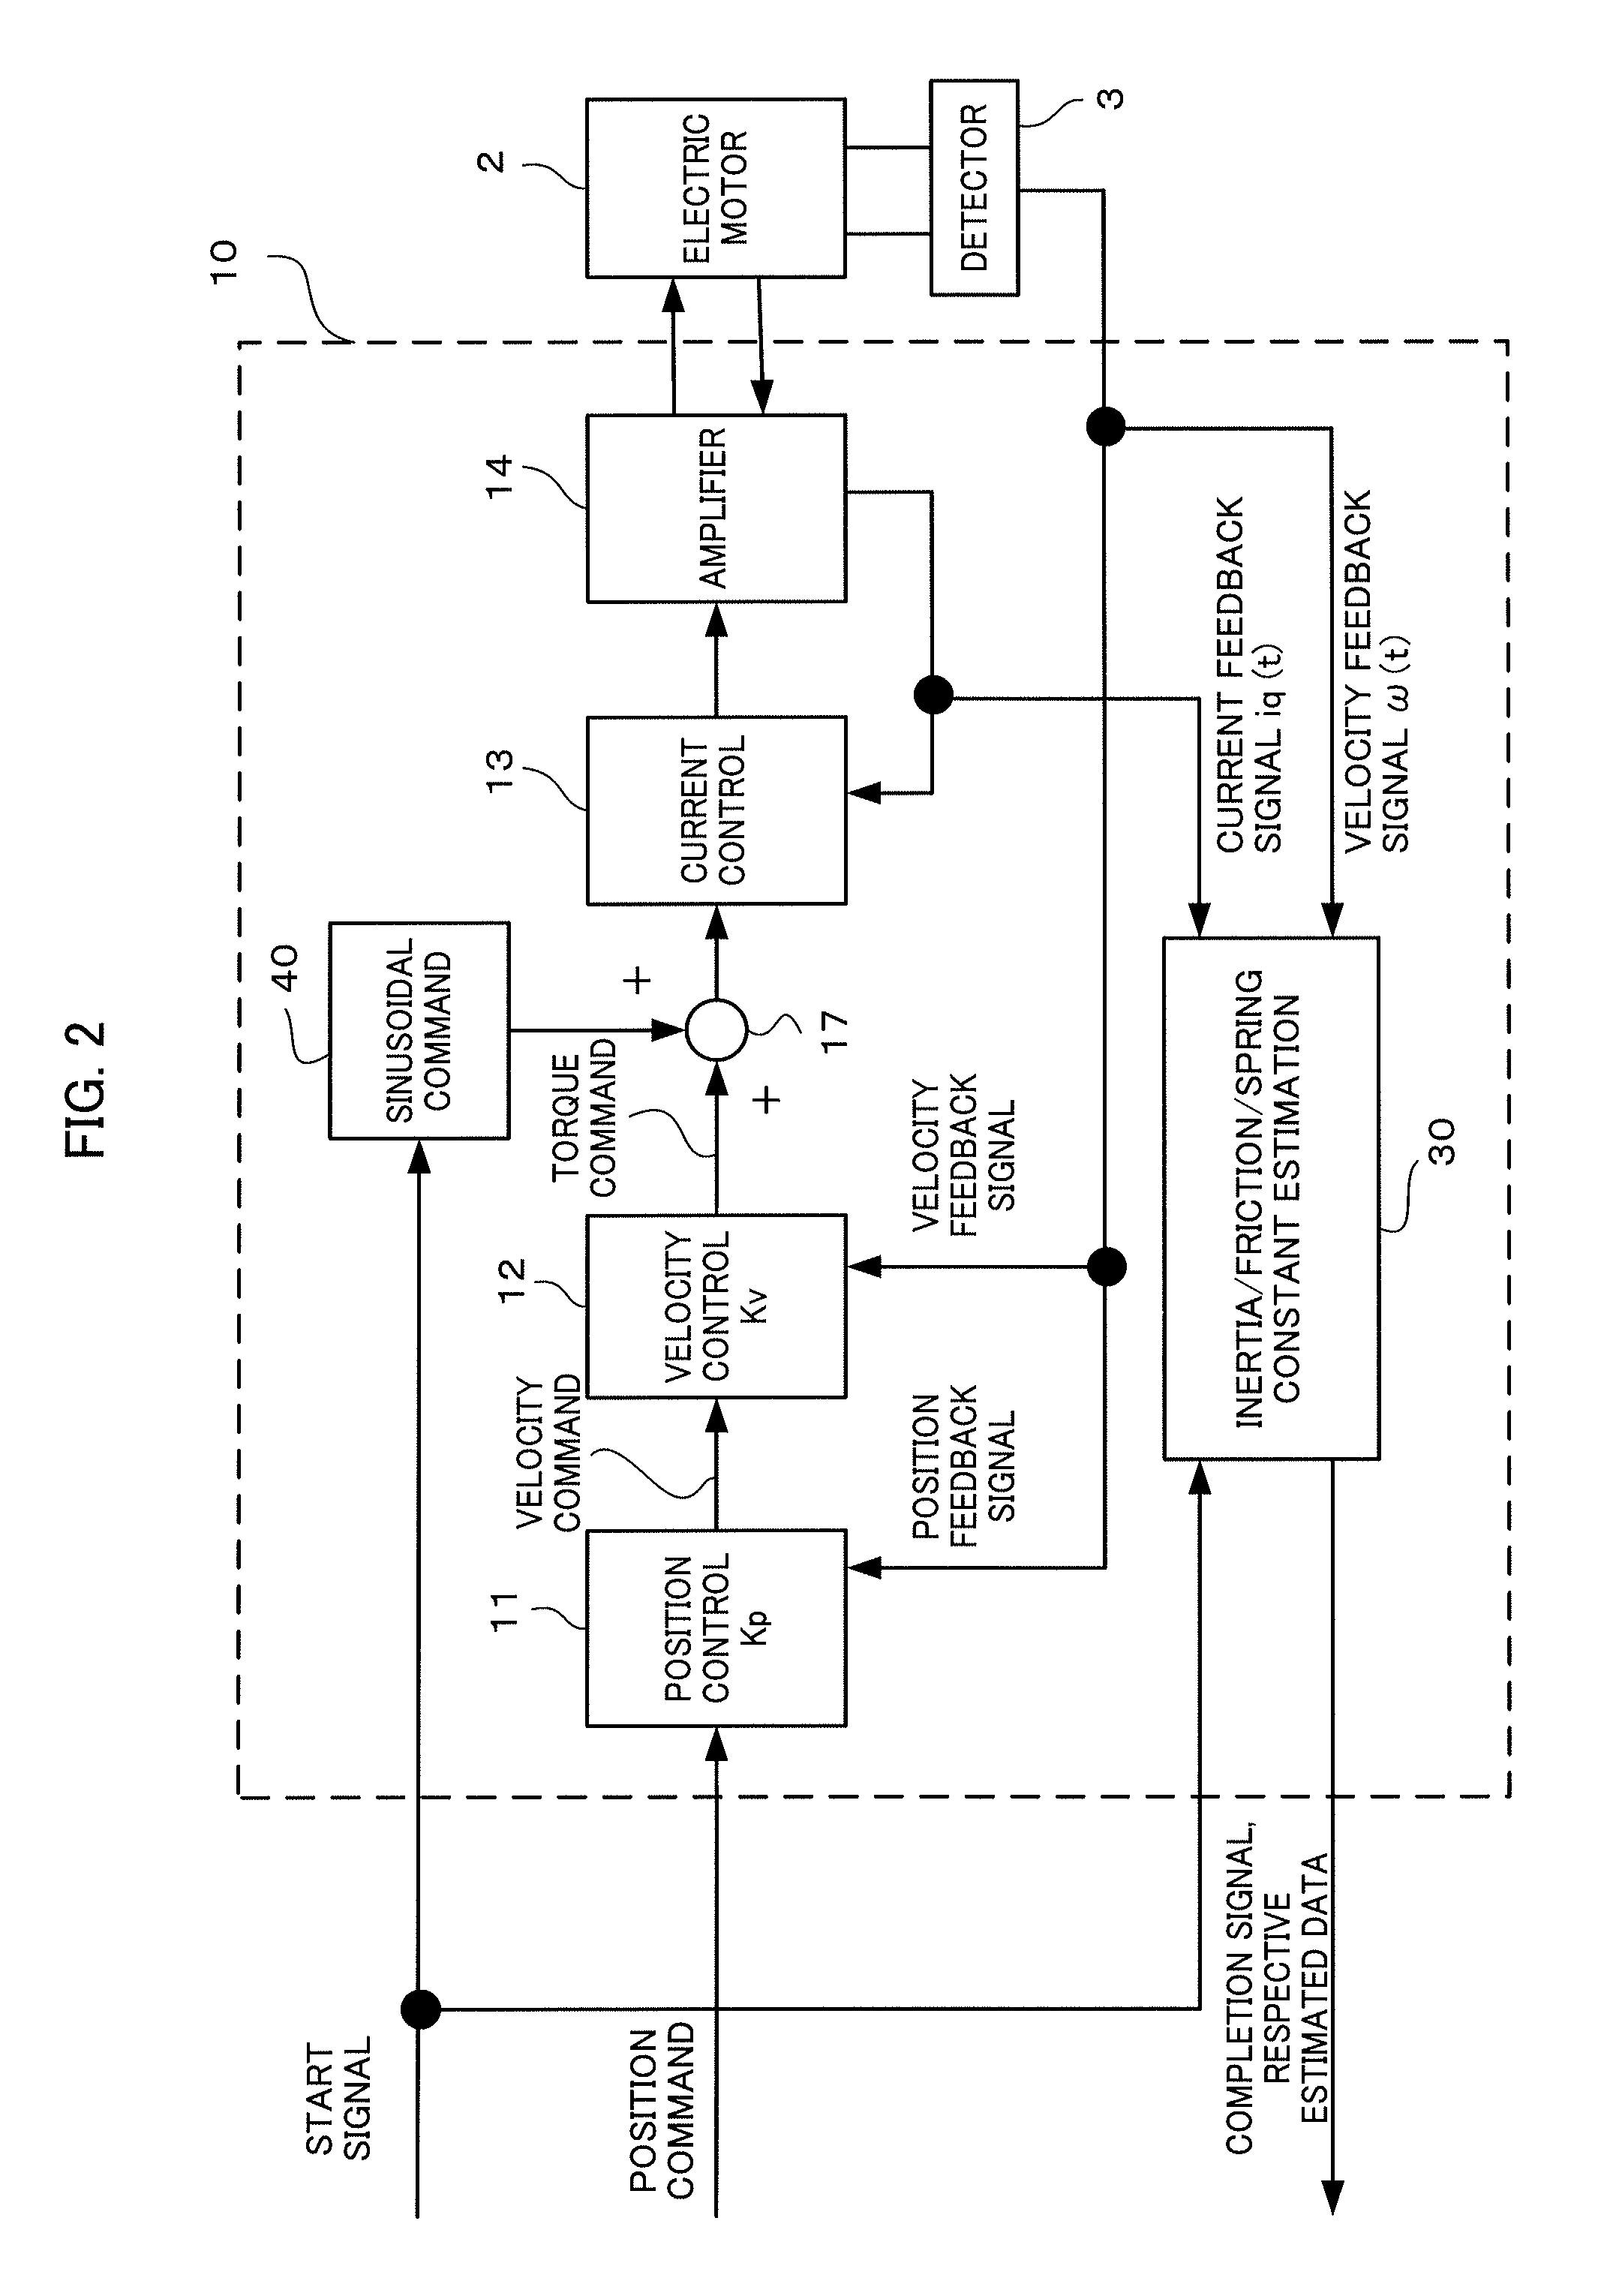 Electric motor controller comprising function for simultaneously estimating inertia, friction, and spring